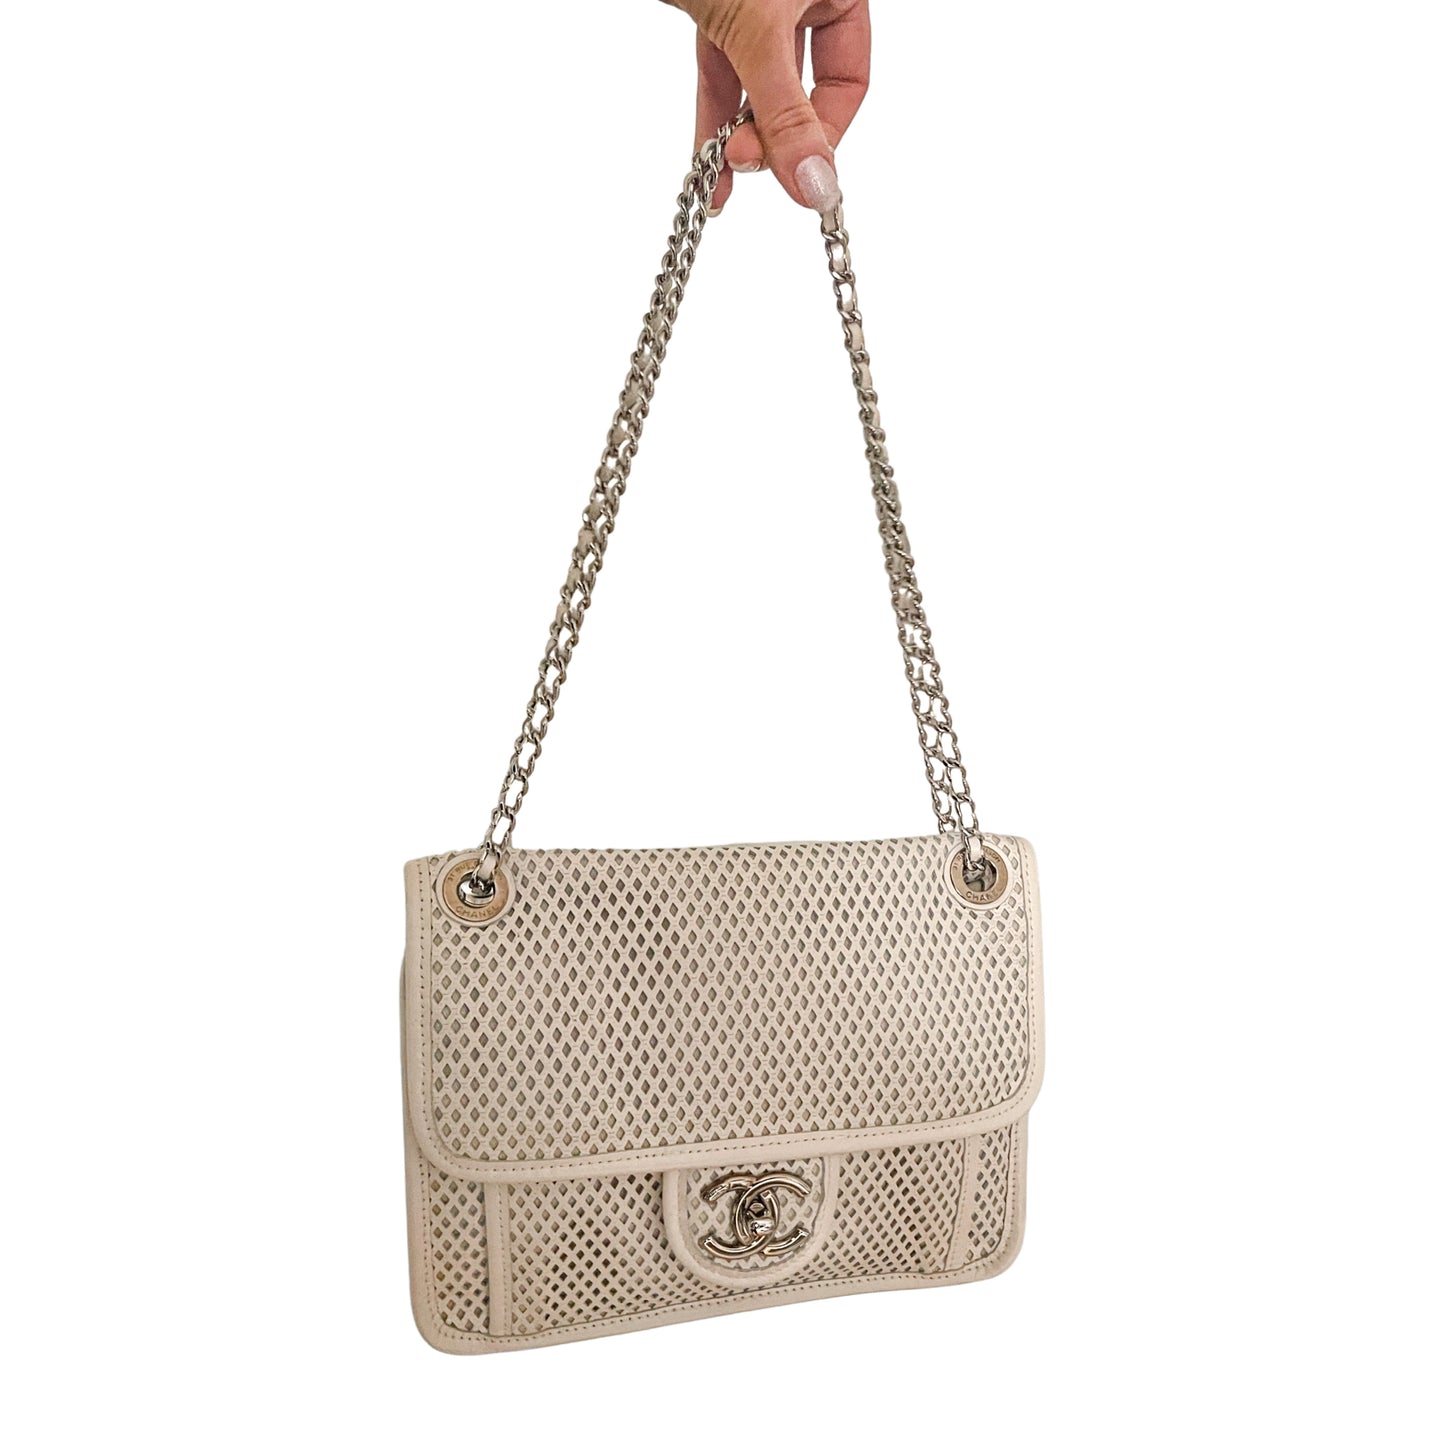 Chanel Up in the Air Perforated French Riviera Flap Bag